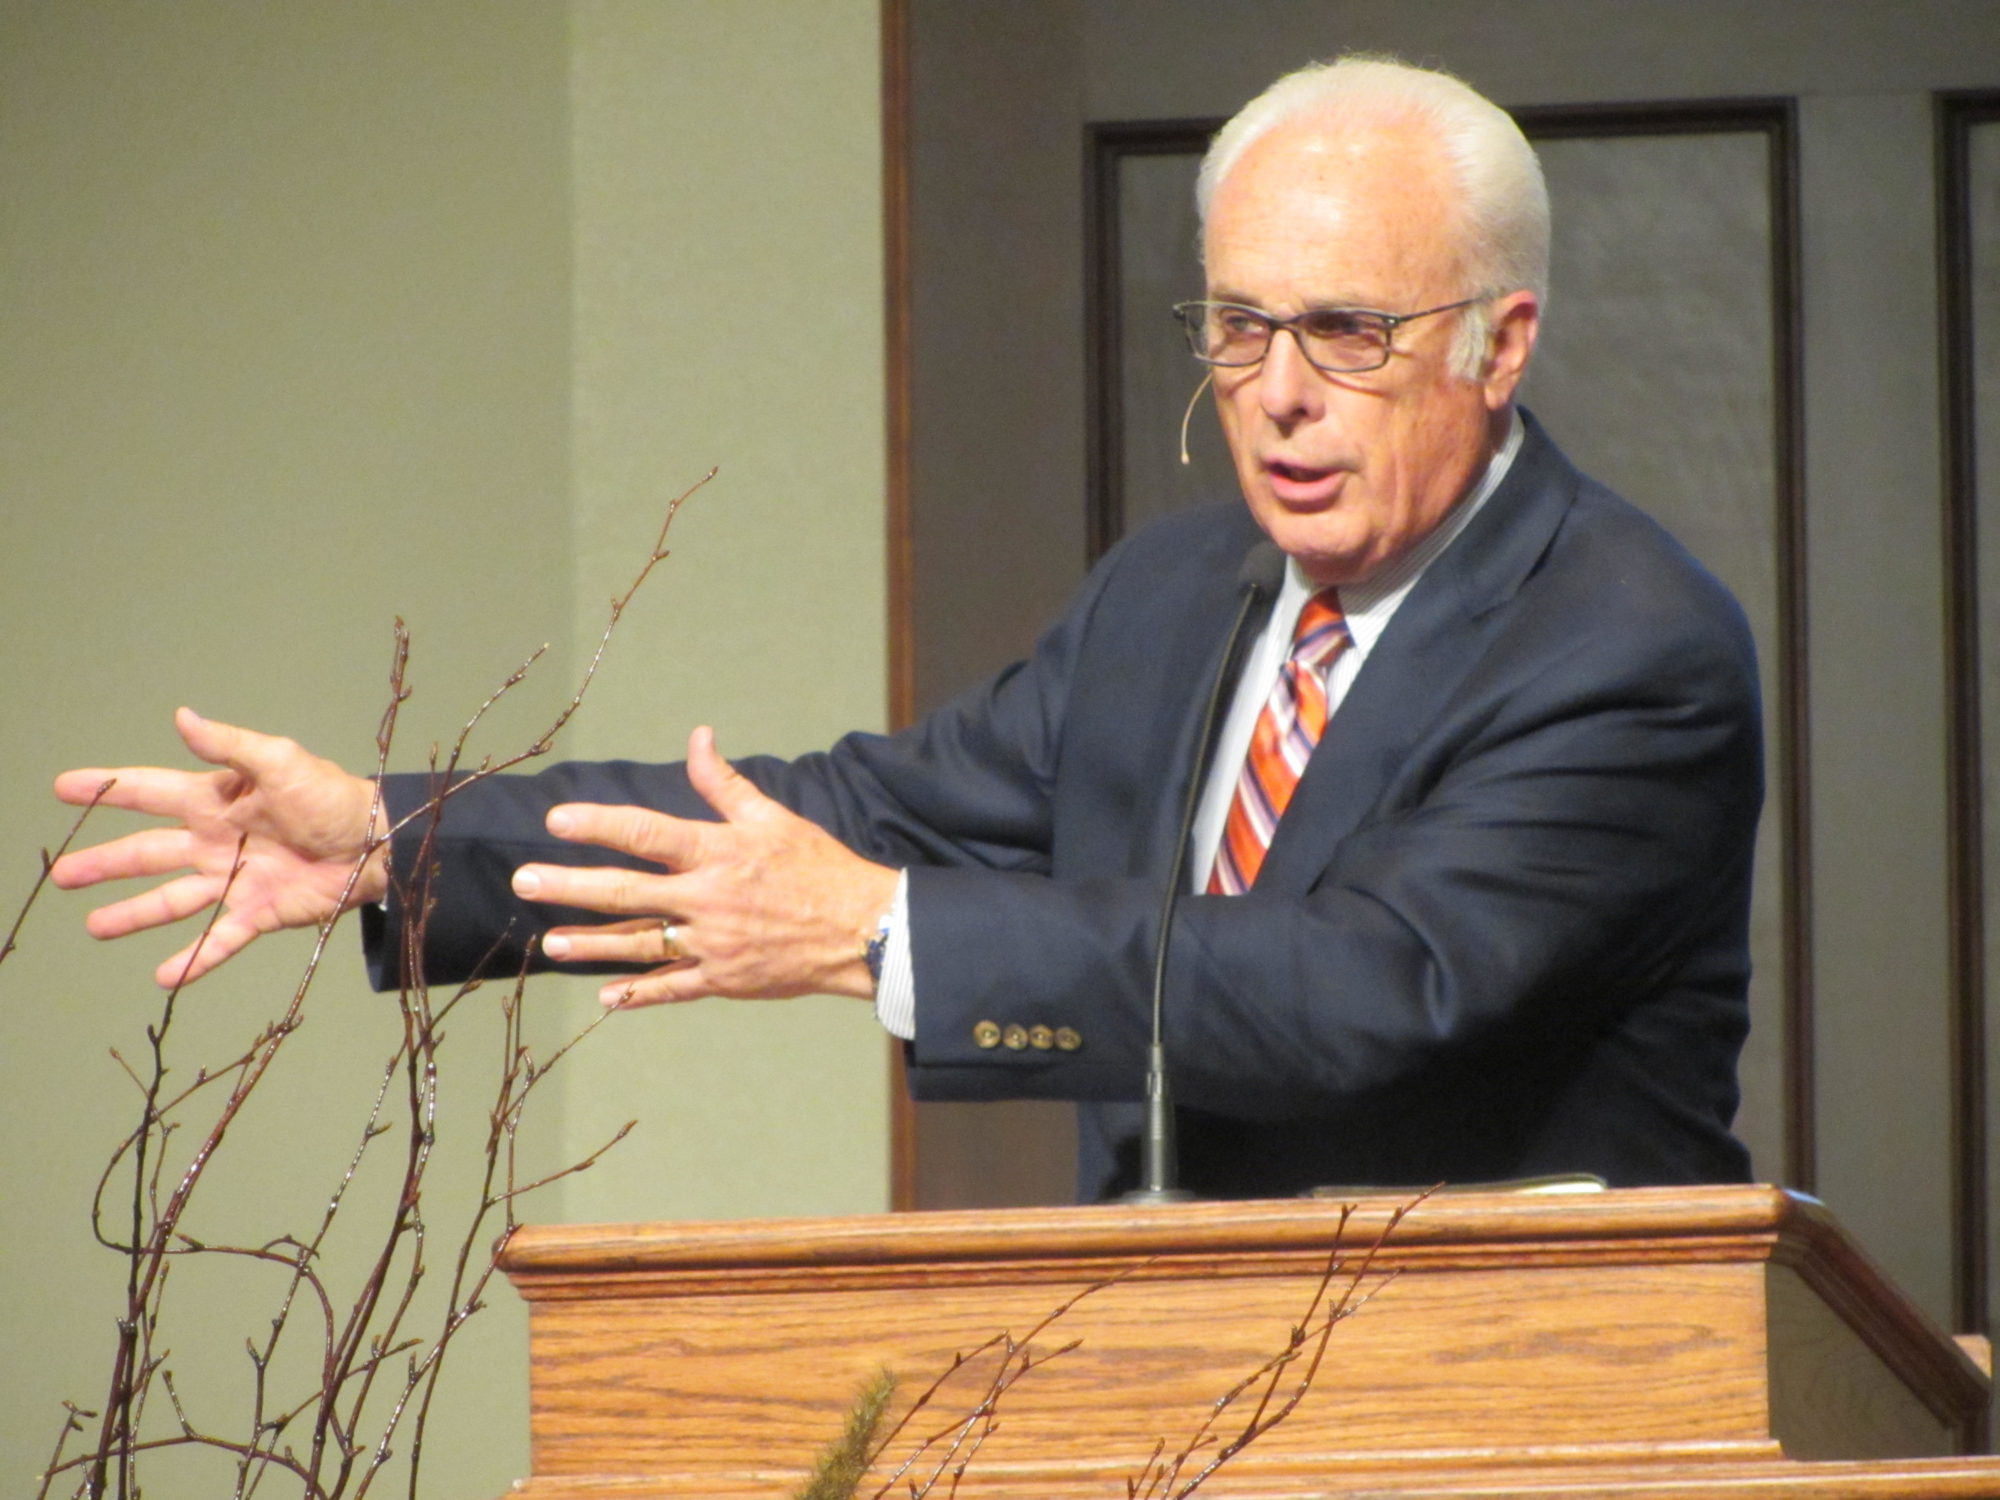 Social Justice and the Gospel: The John MacArthur Controversy